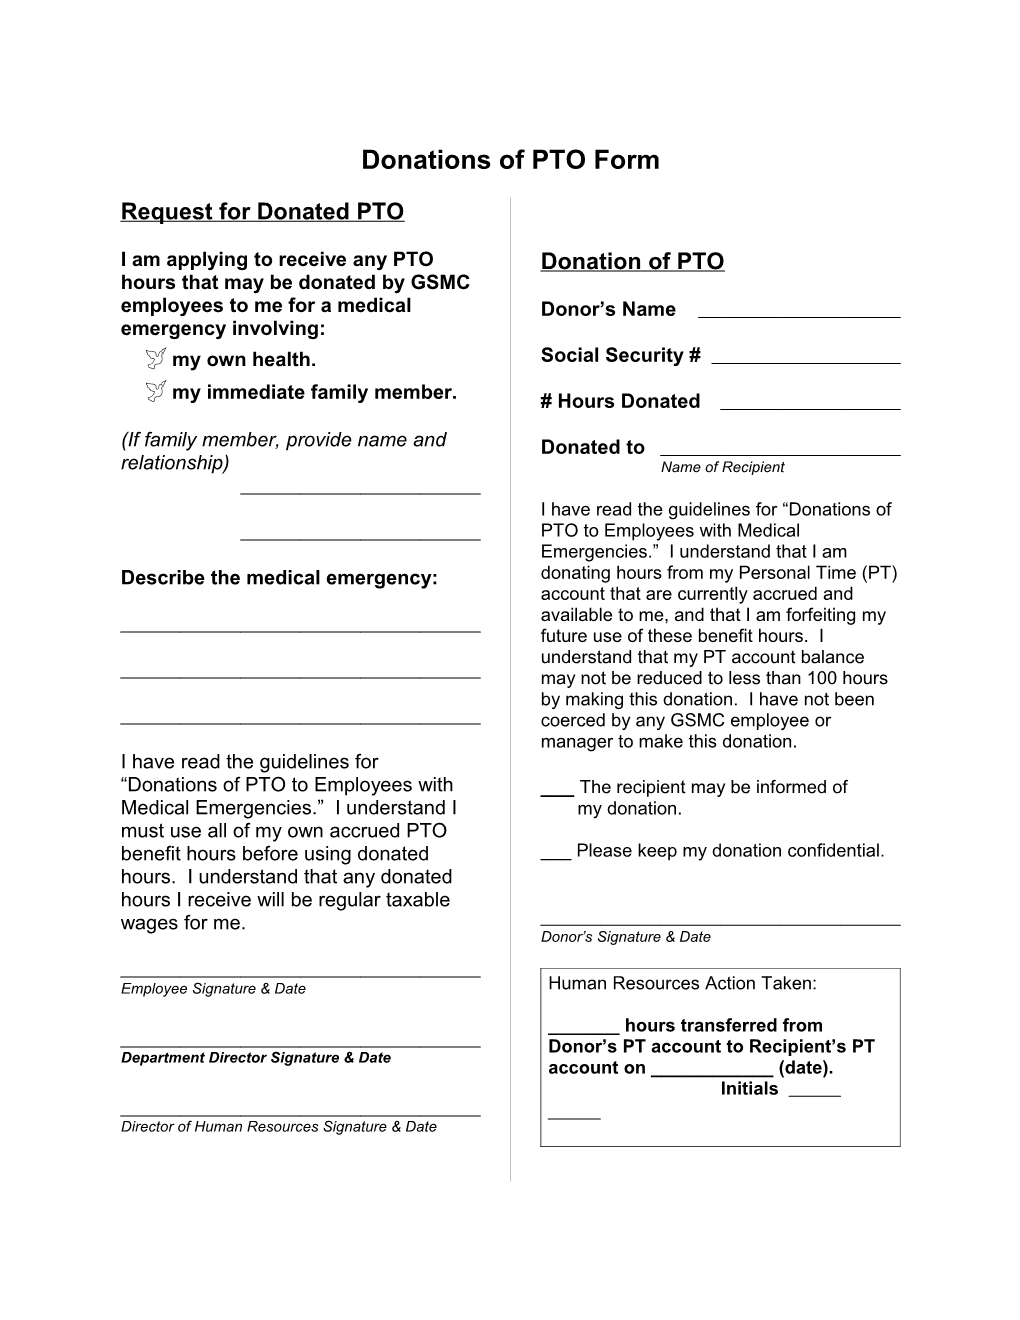 Donations of PTO Form